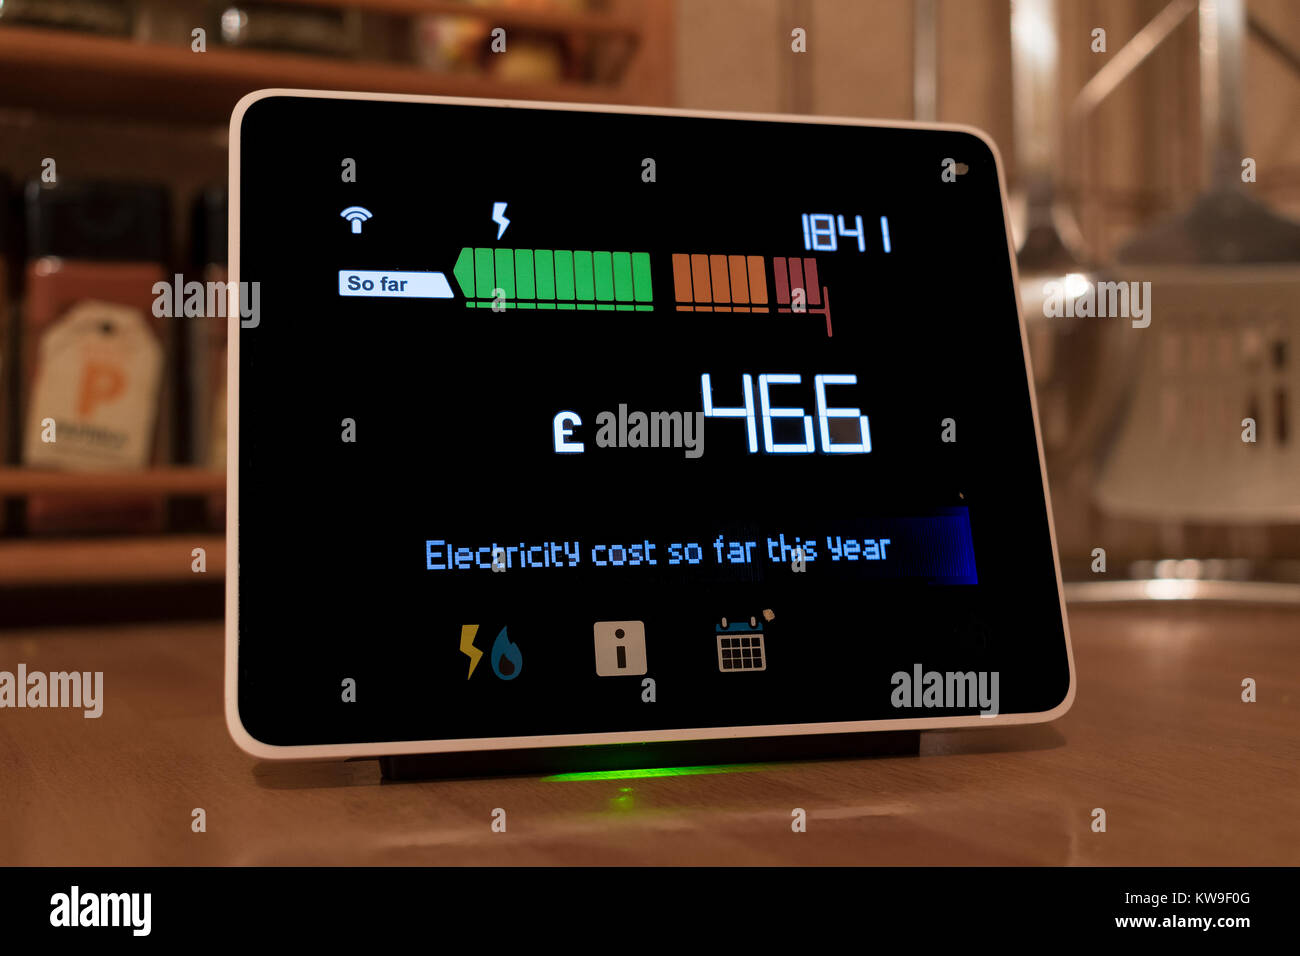 chameleon technology smart meter, the display shows the cost of energy being used in a home. Stock Photo